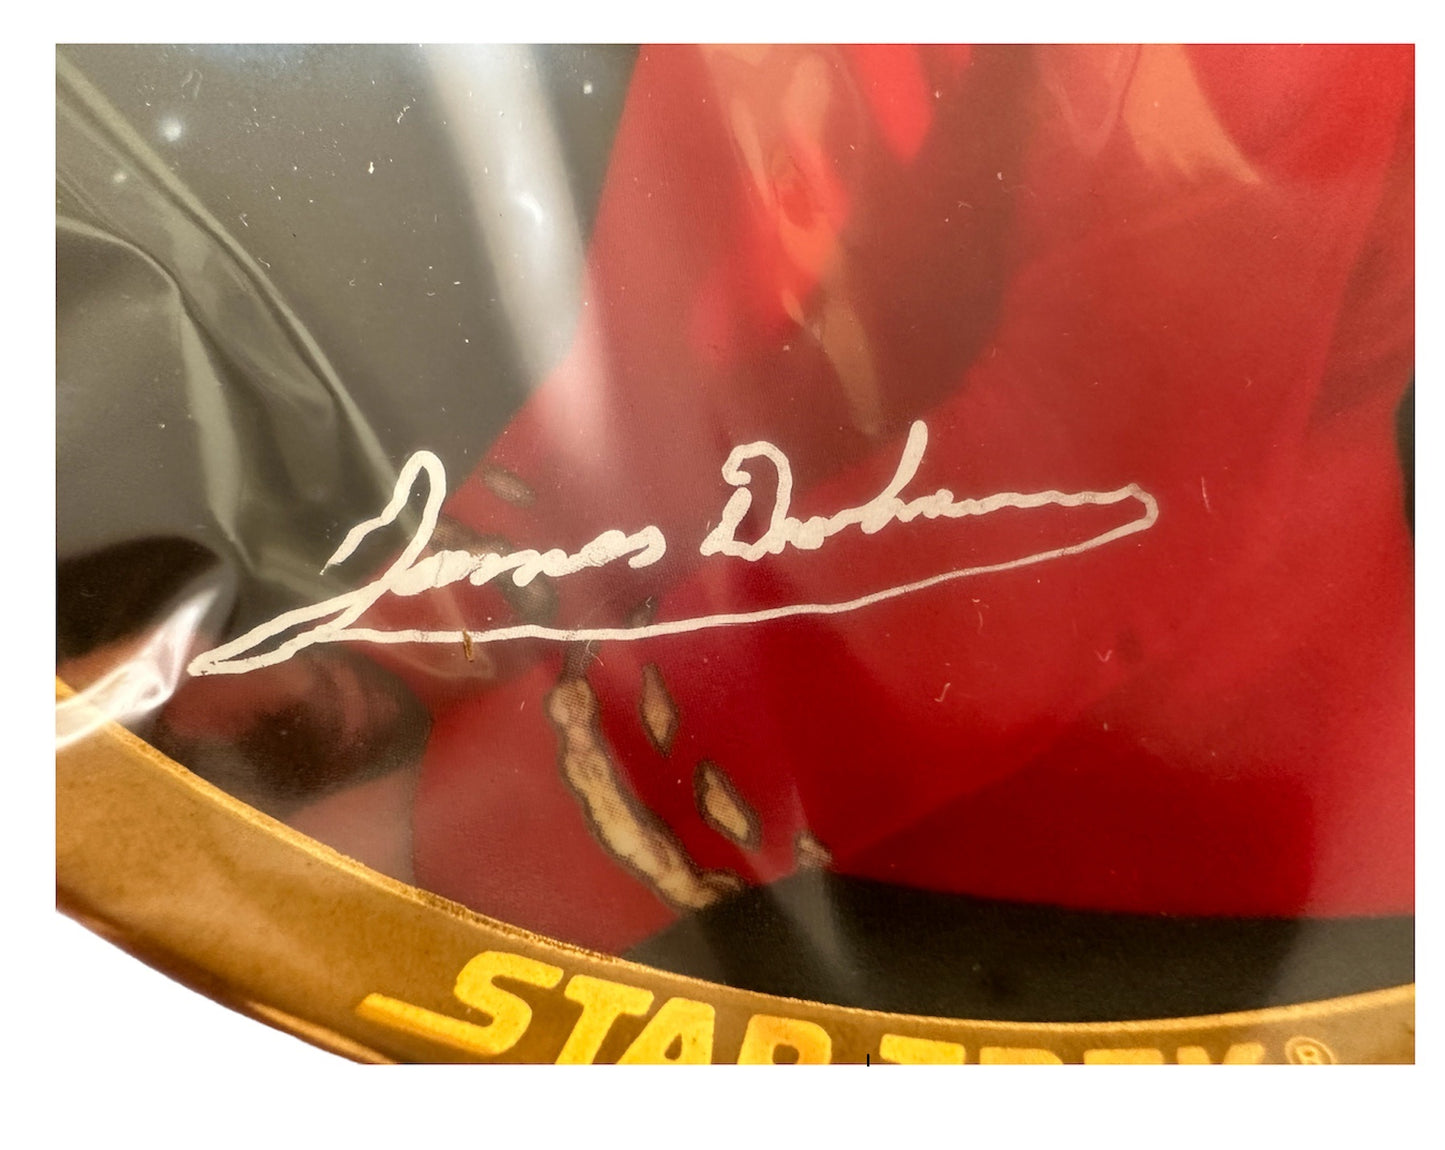 Vintage 1991 Star Trek The Original Series Scotty 25th Anniversary Commemorative Plate - Personally Signed Autographed By James Doohan With COA - Ultra Rare